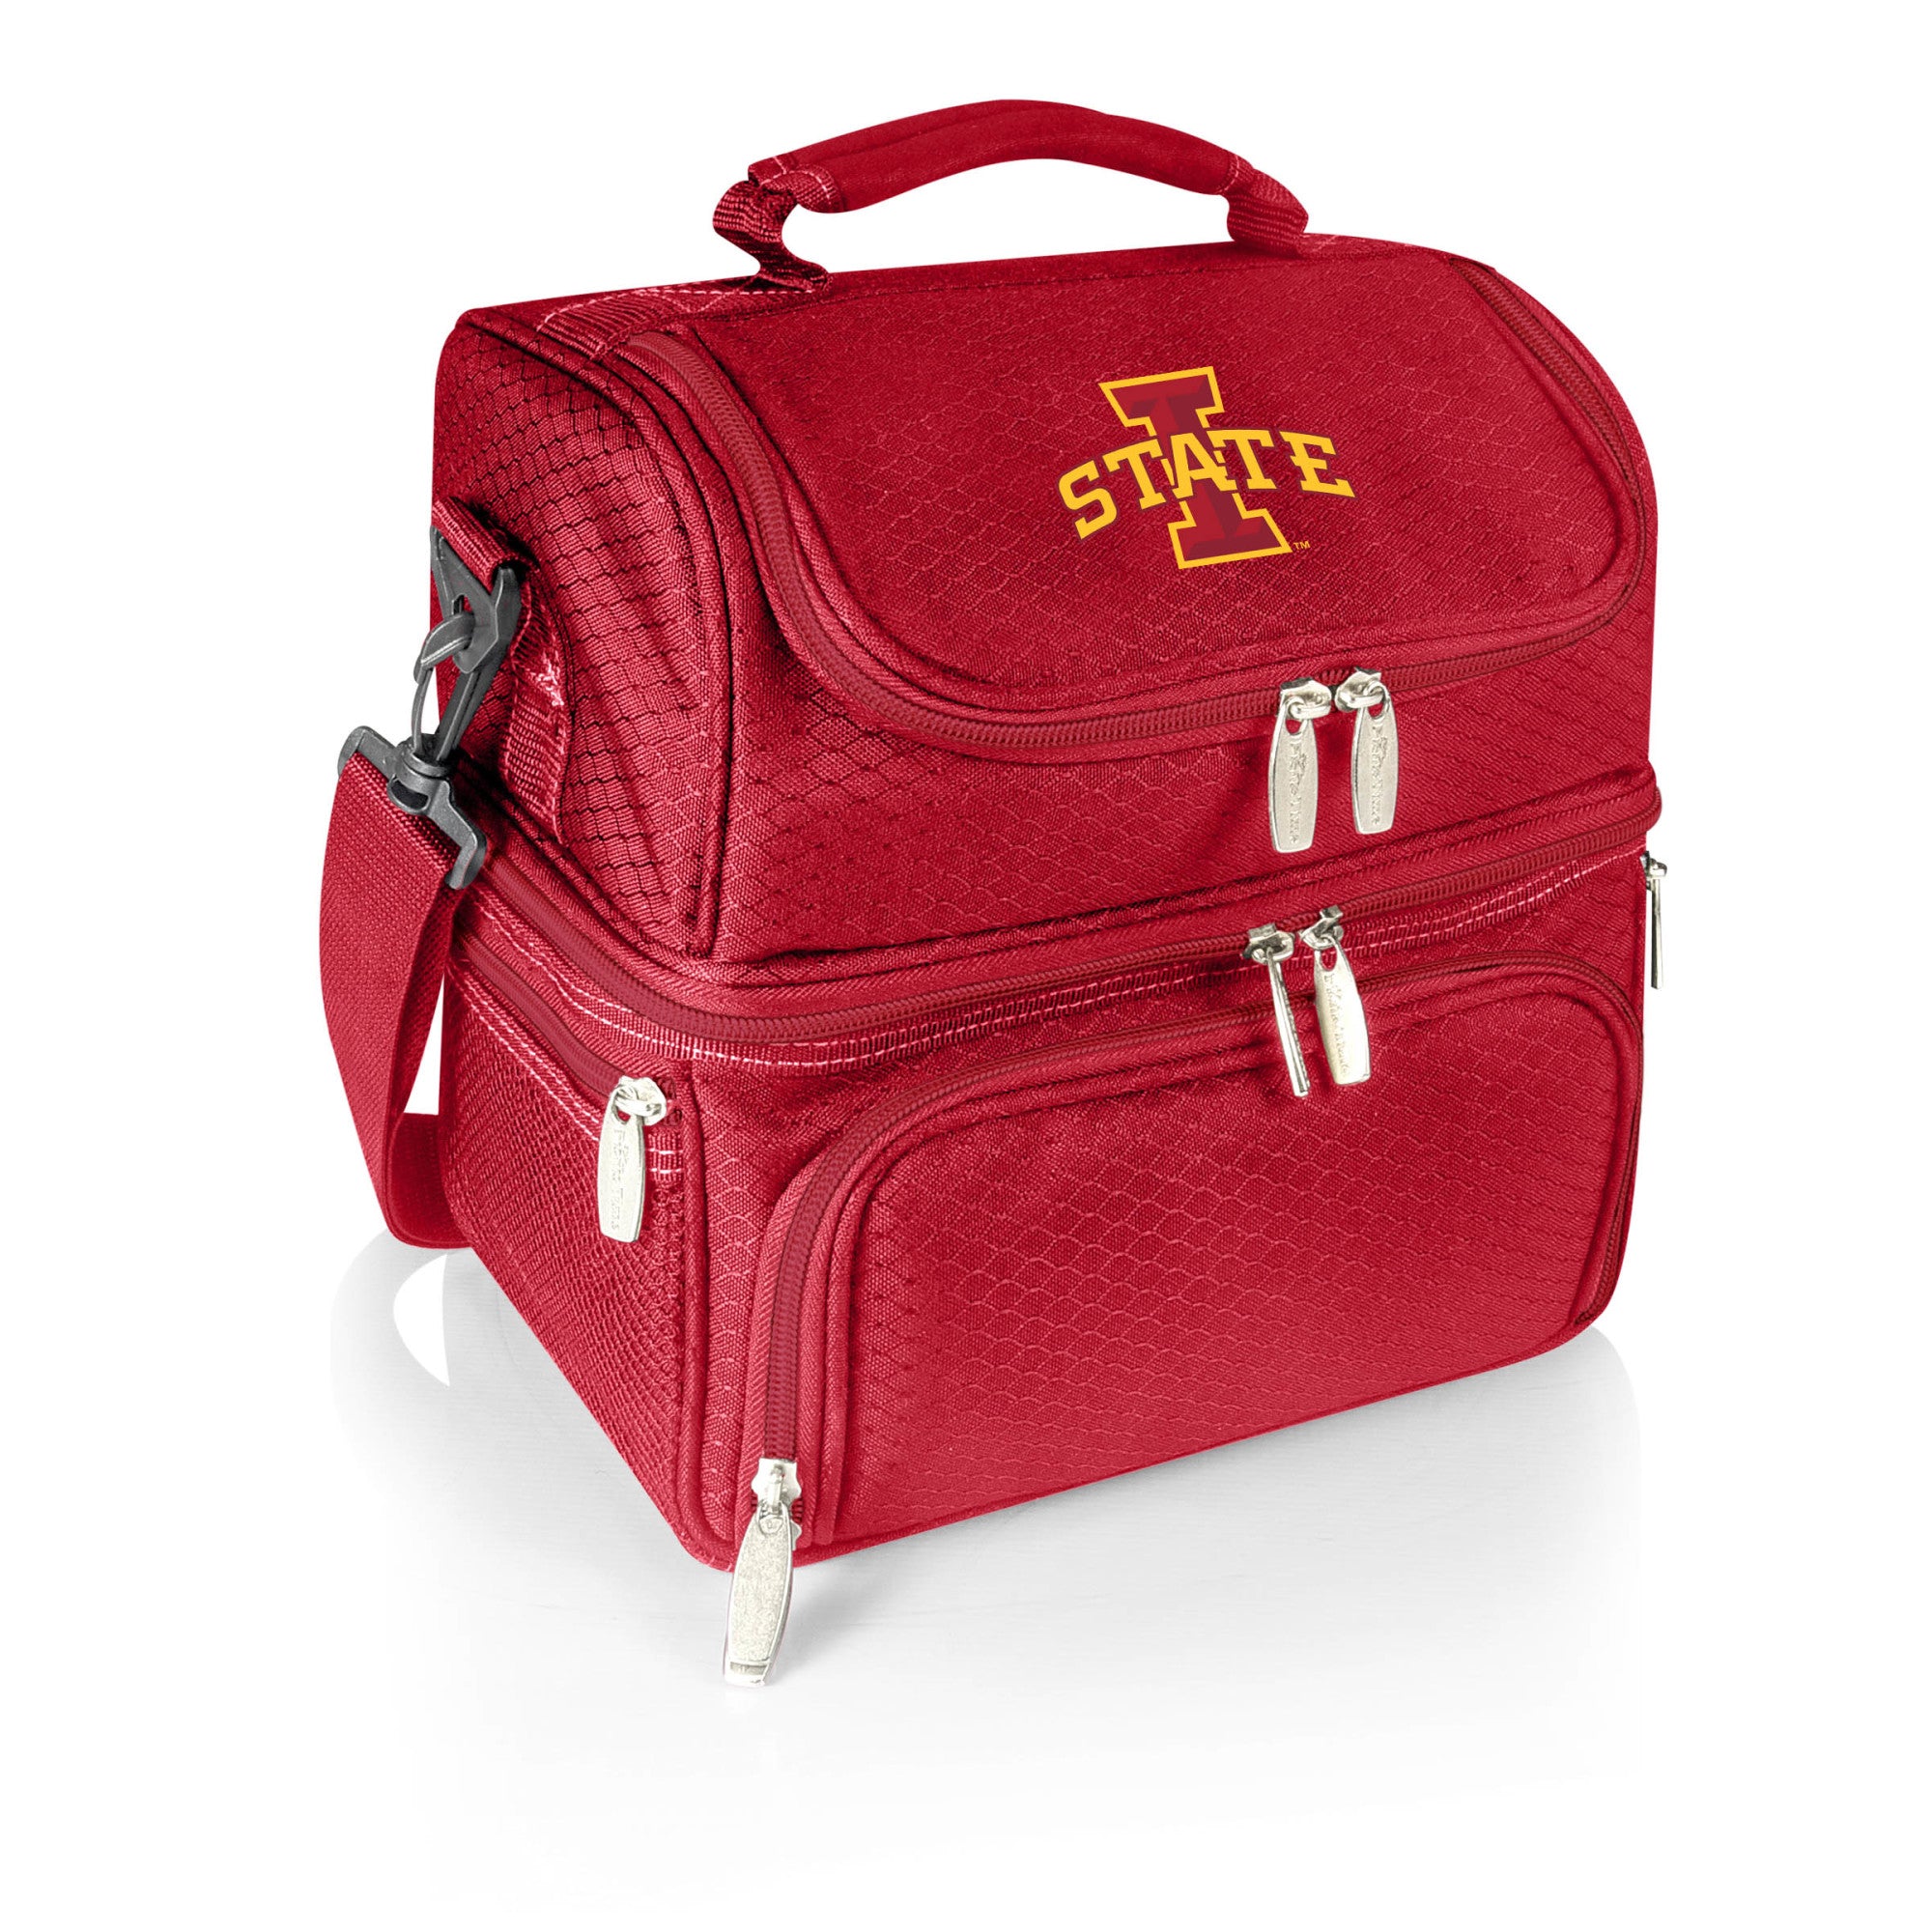 Iowa State Cyclones - Pranzo Lunch Bag Cooler with Utensils